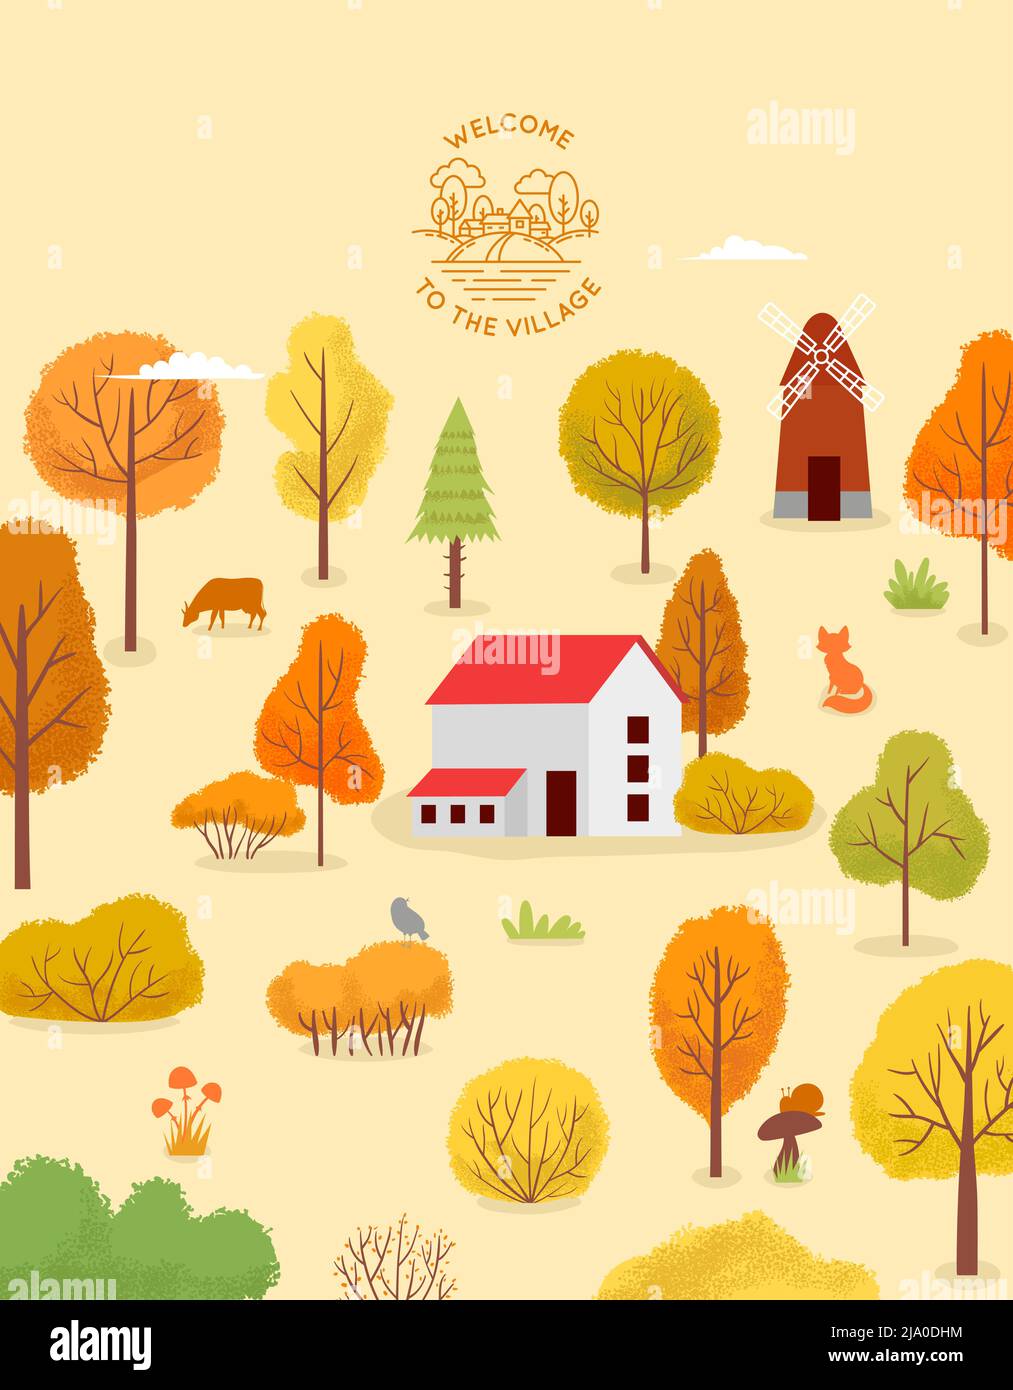 Village house stay at surround autumn wood Stock Vector